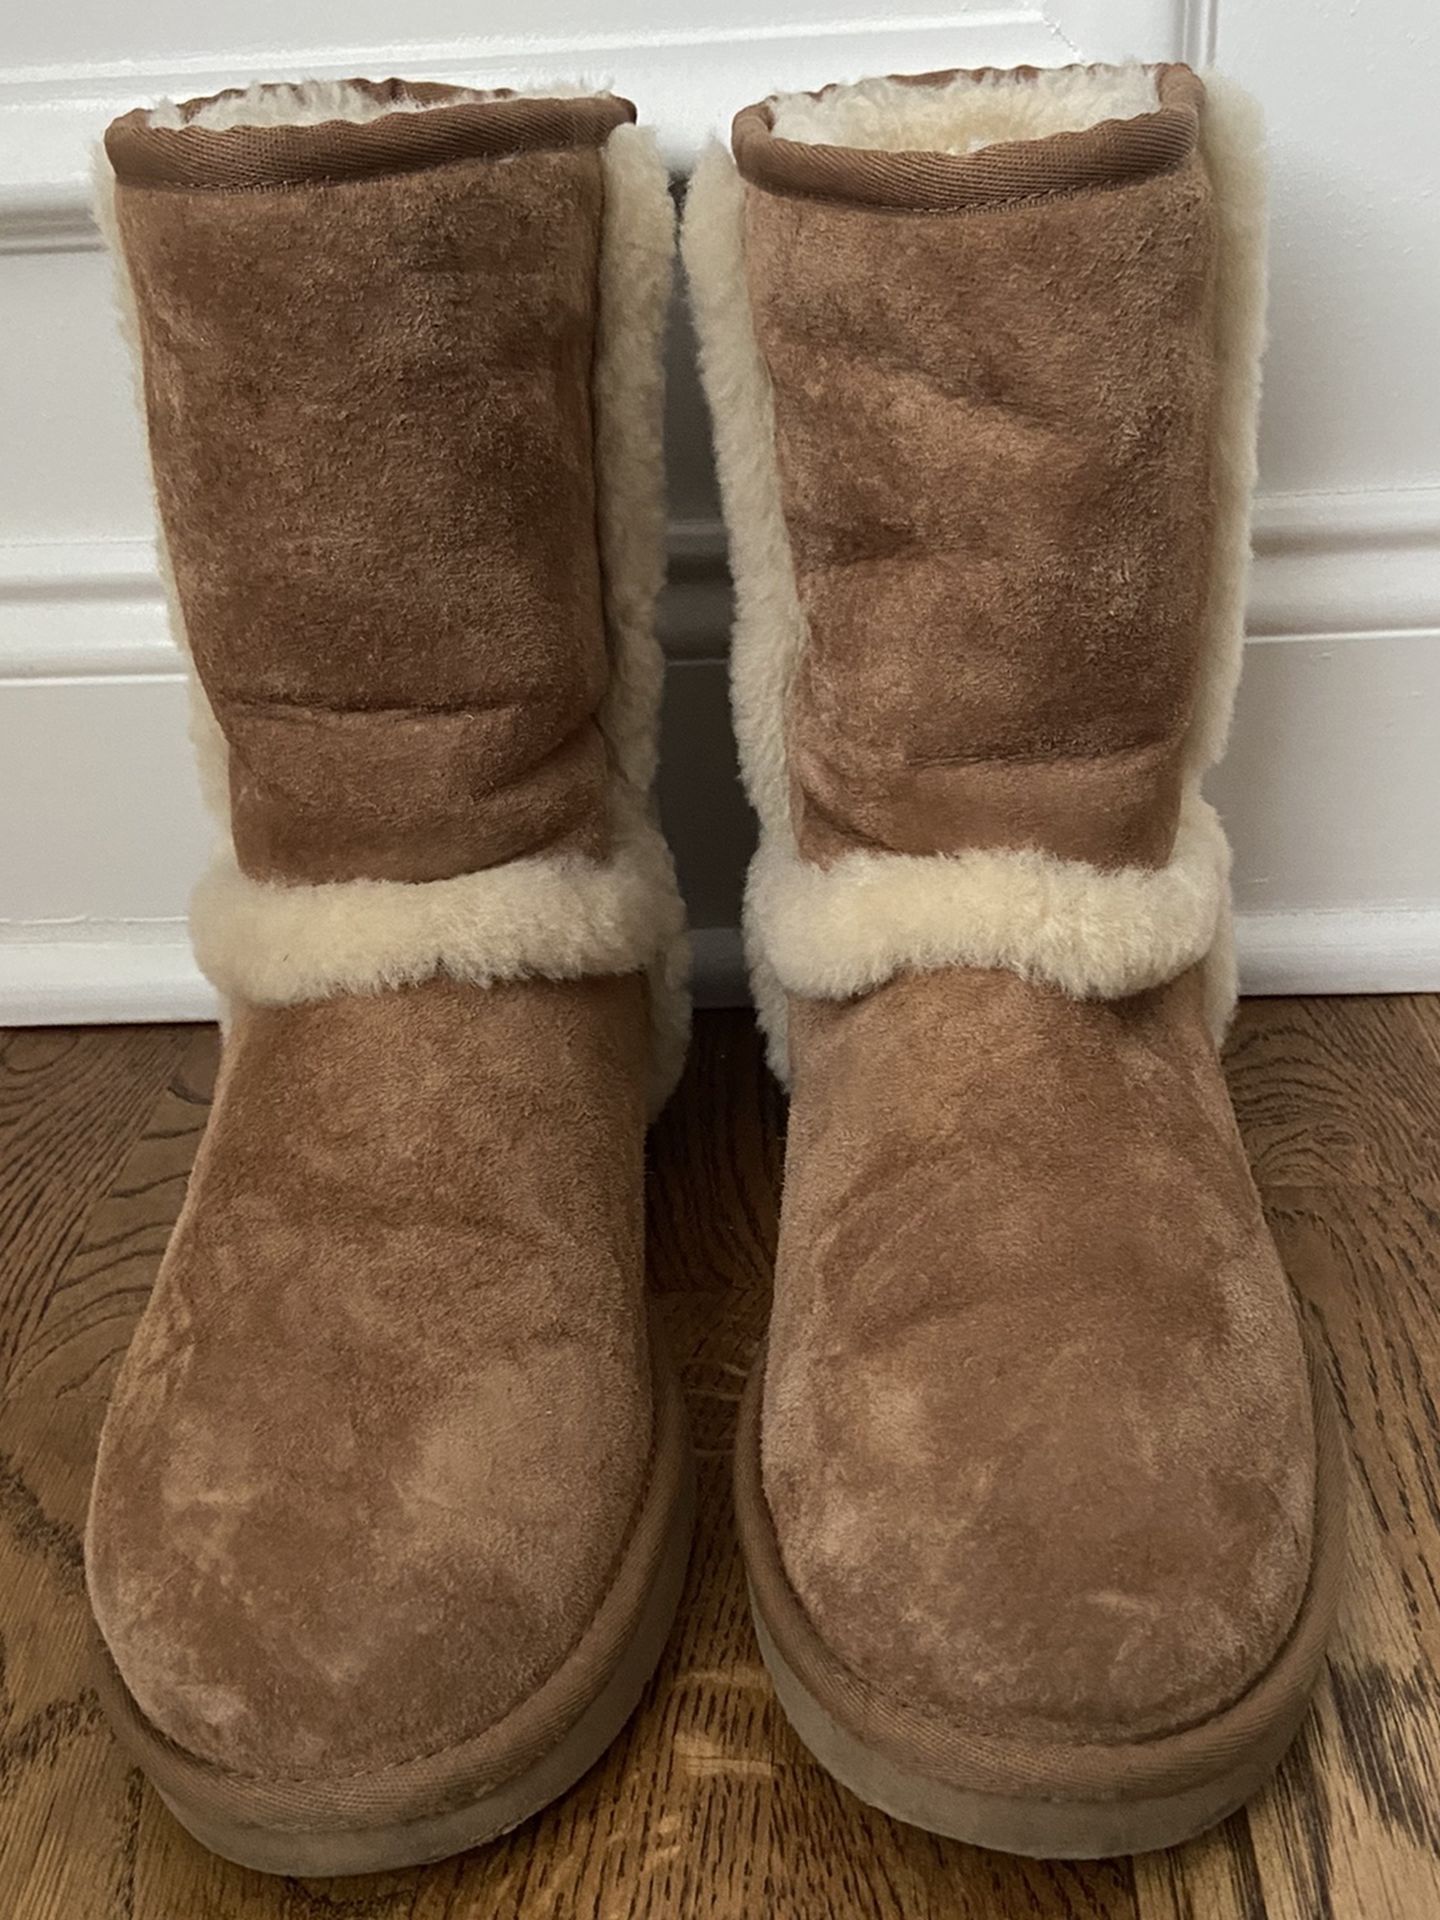 UGG BOOTS Size 9